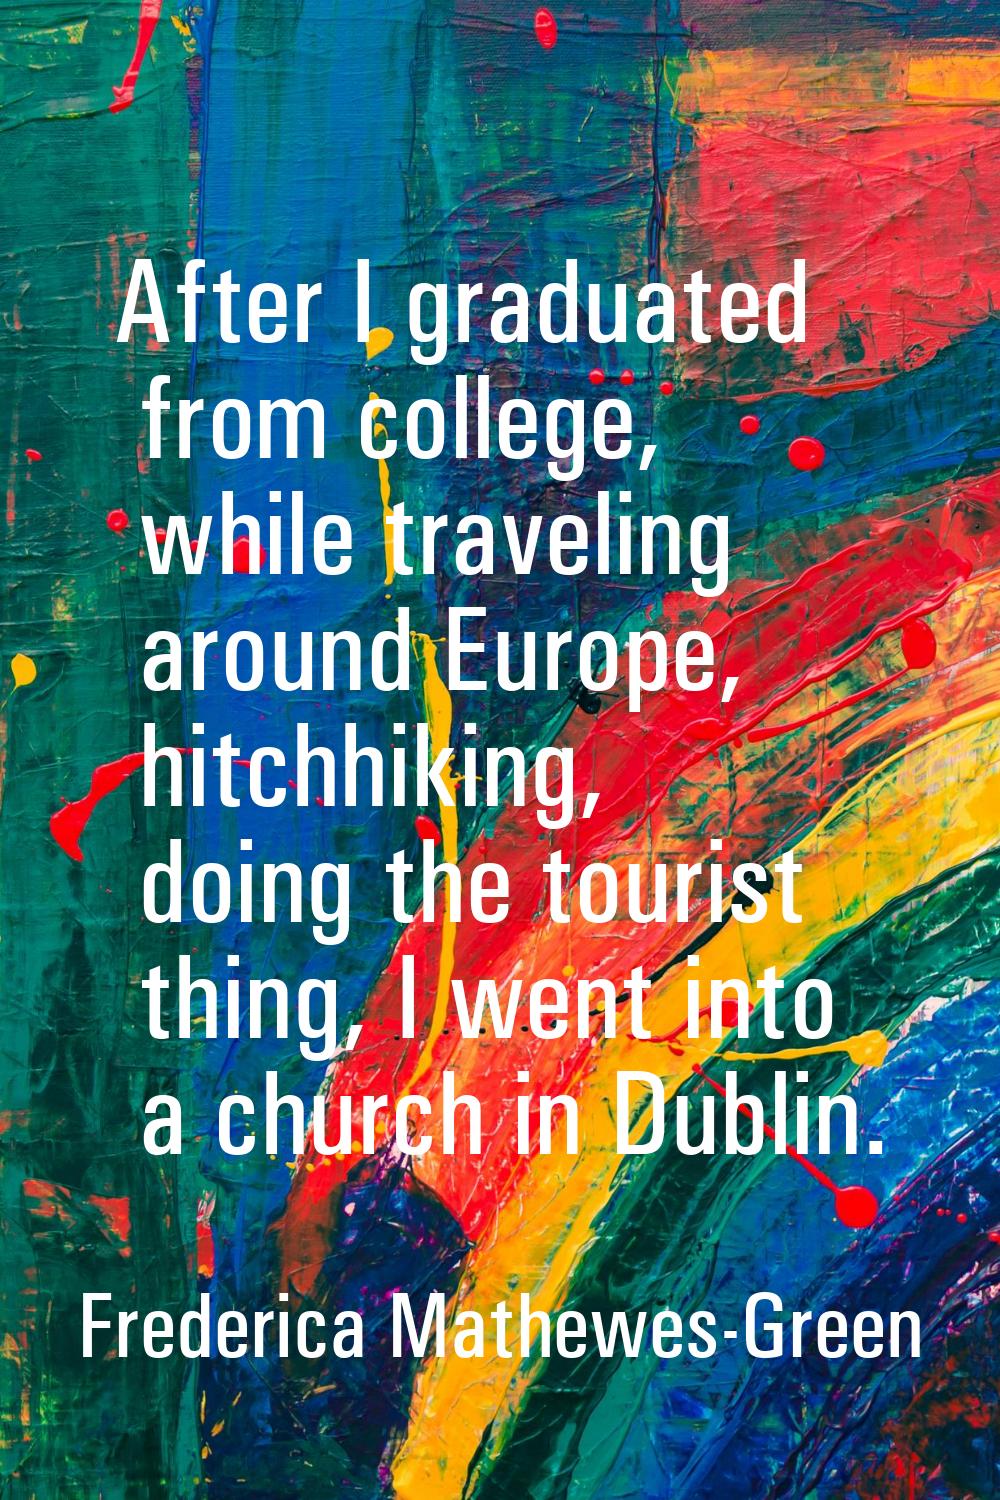 After I graduated from college, while traveling around Europe, hitchhiking, doing the tourist thing